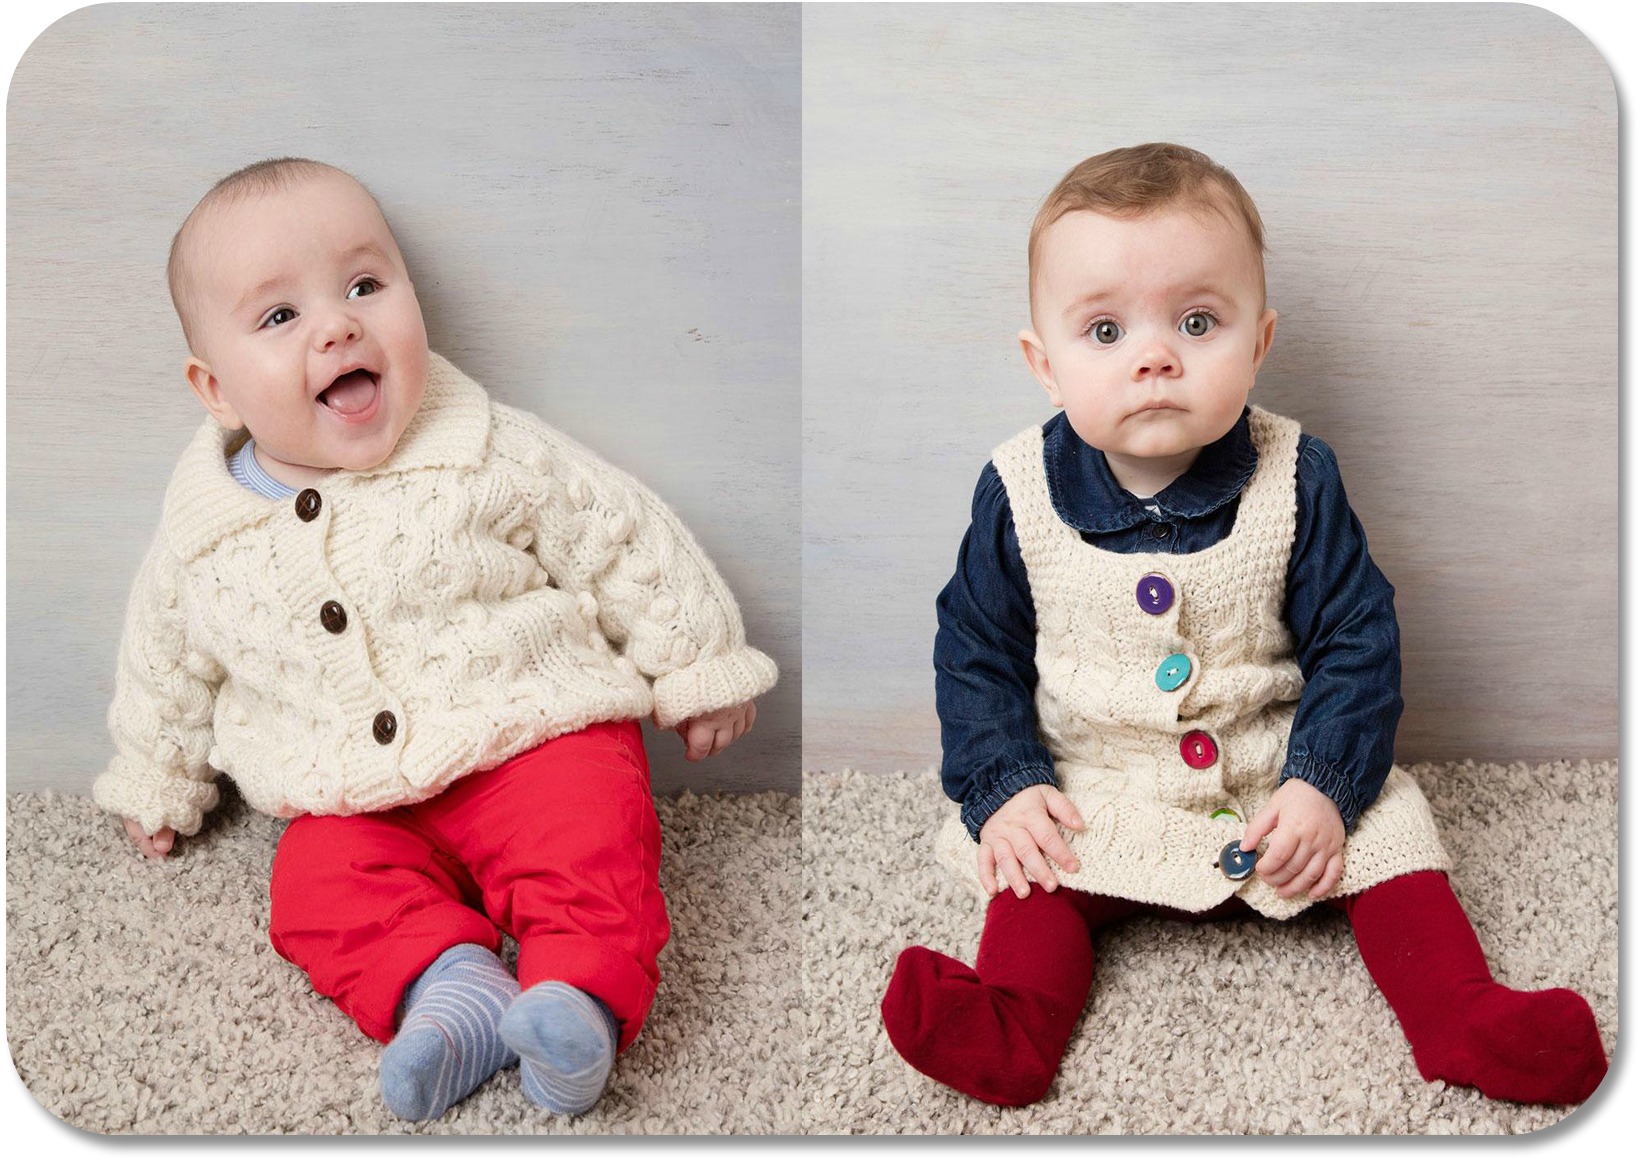 Traditional Irish Clothing - kids clothes from Blarney Woollen Mills.